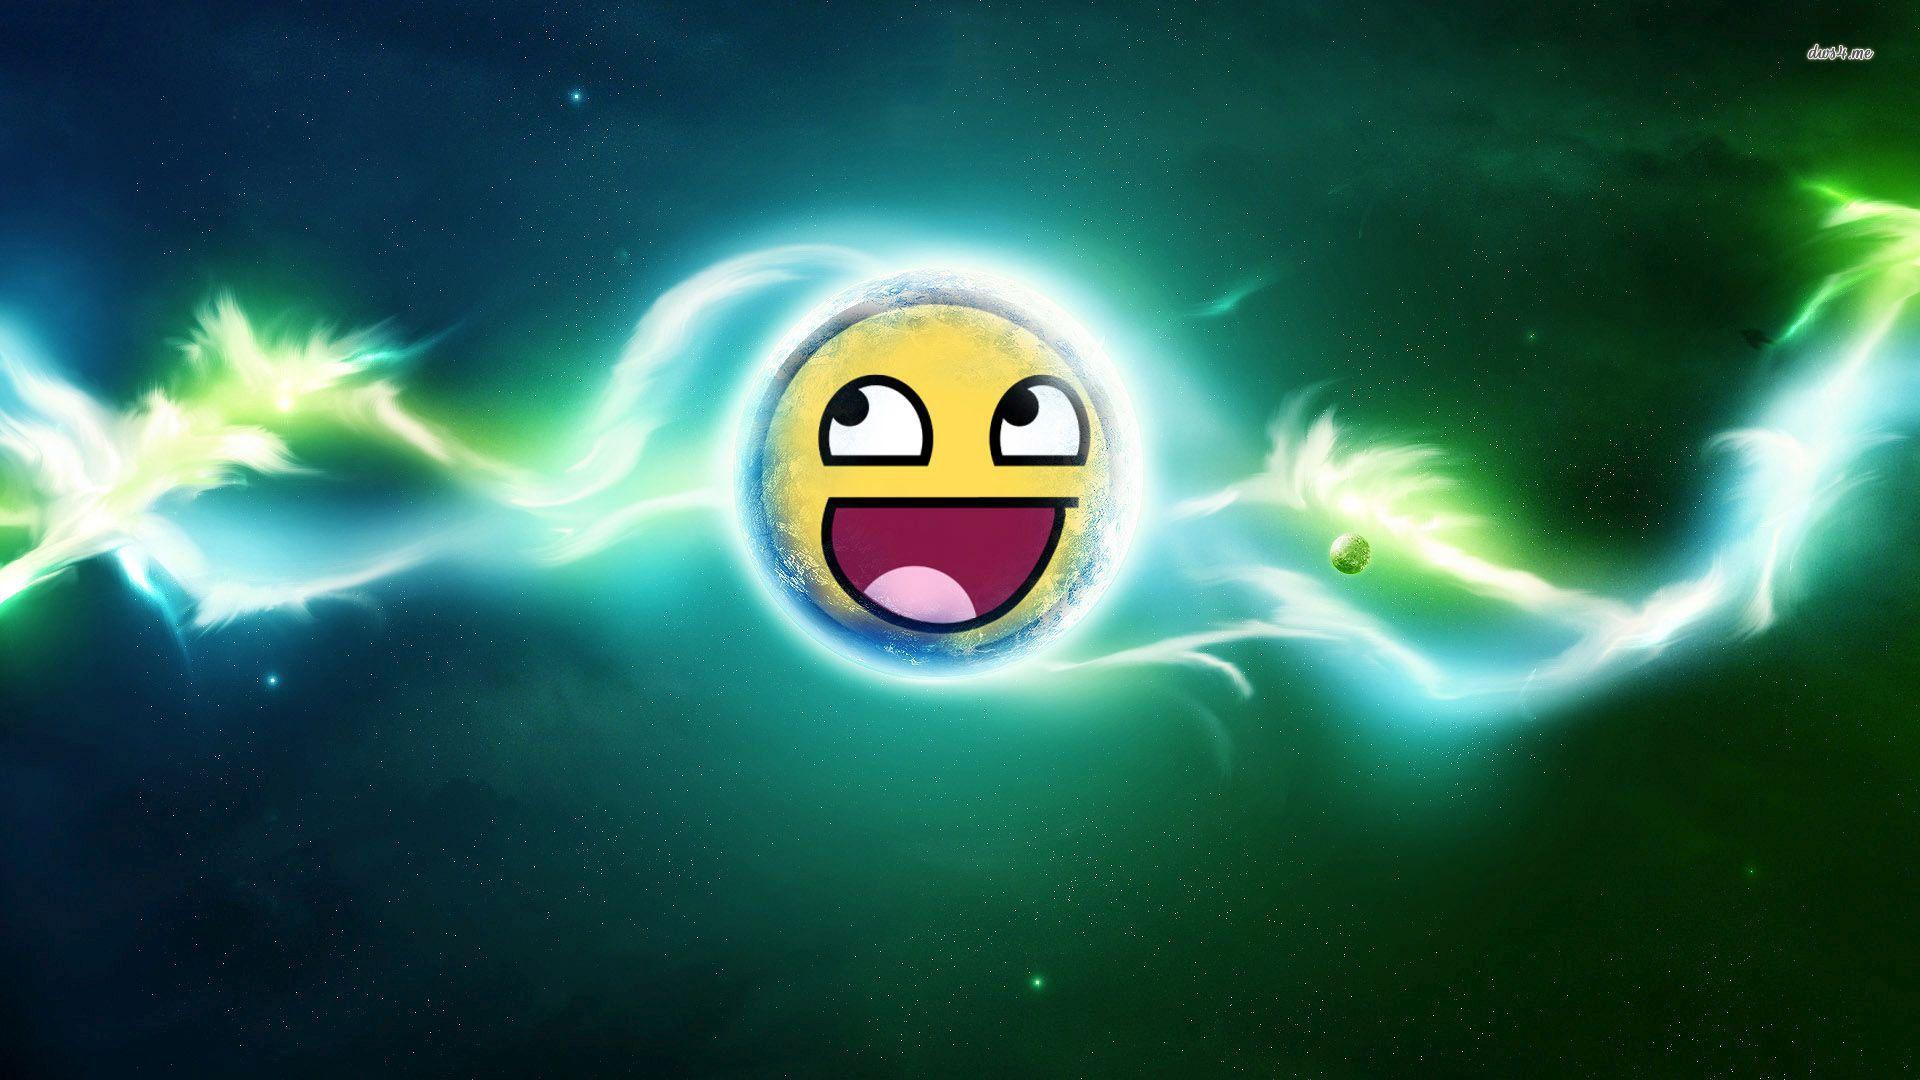 Awesome Face in Space wallpaper wallpaper